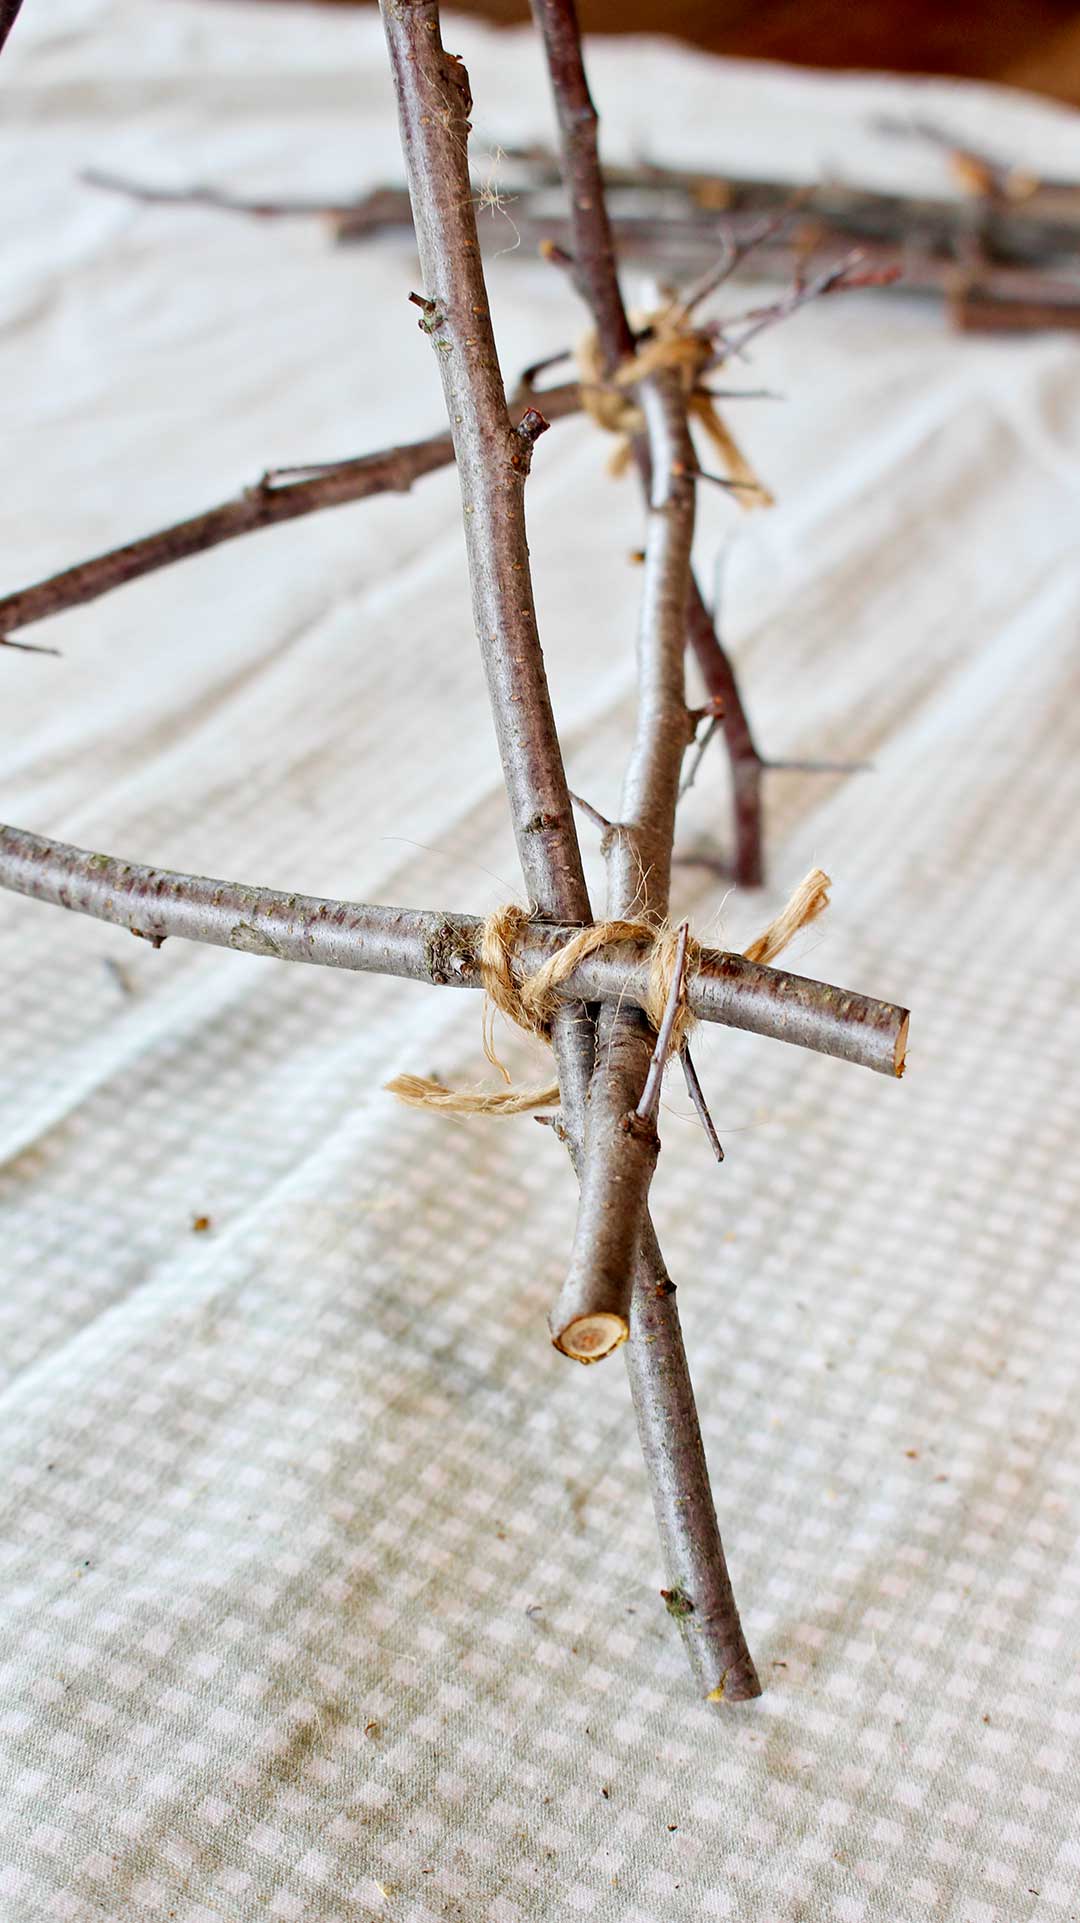 Close up view of the joint where the twigs are tied together with twine.